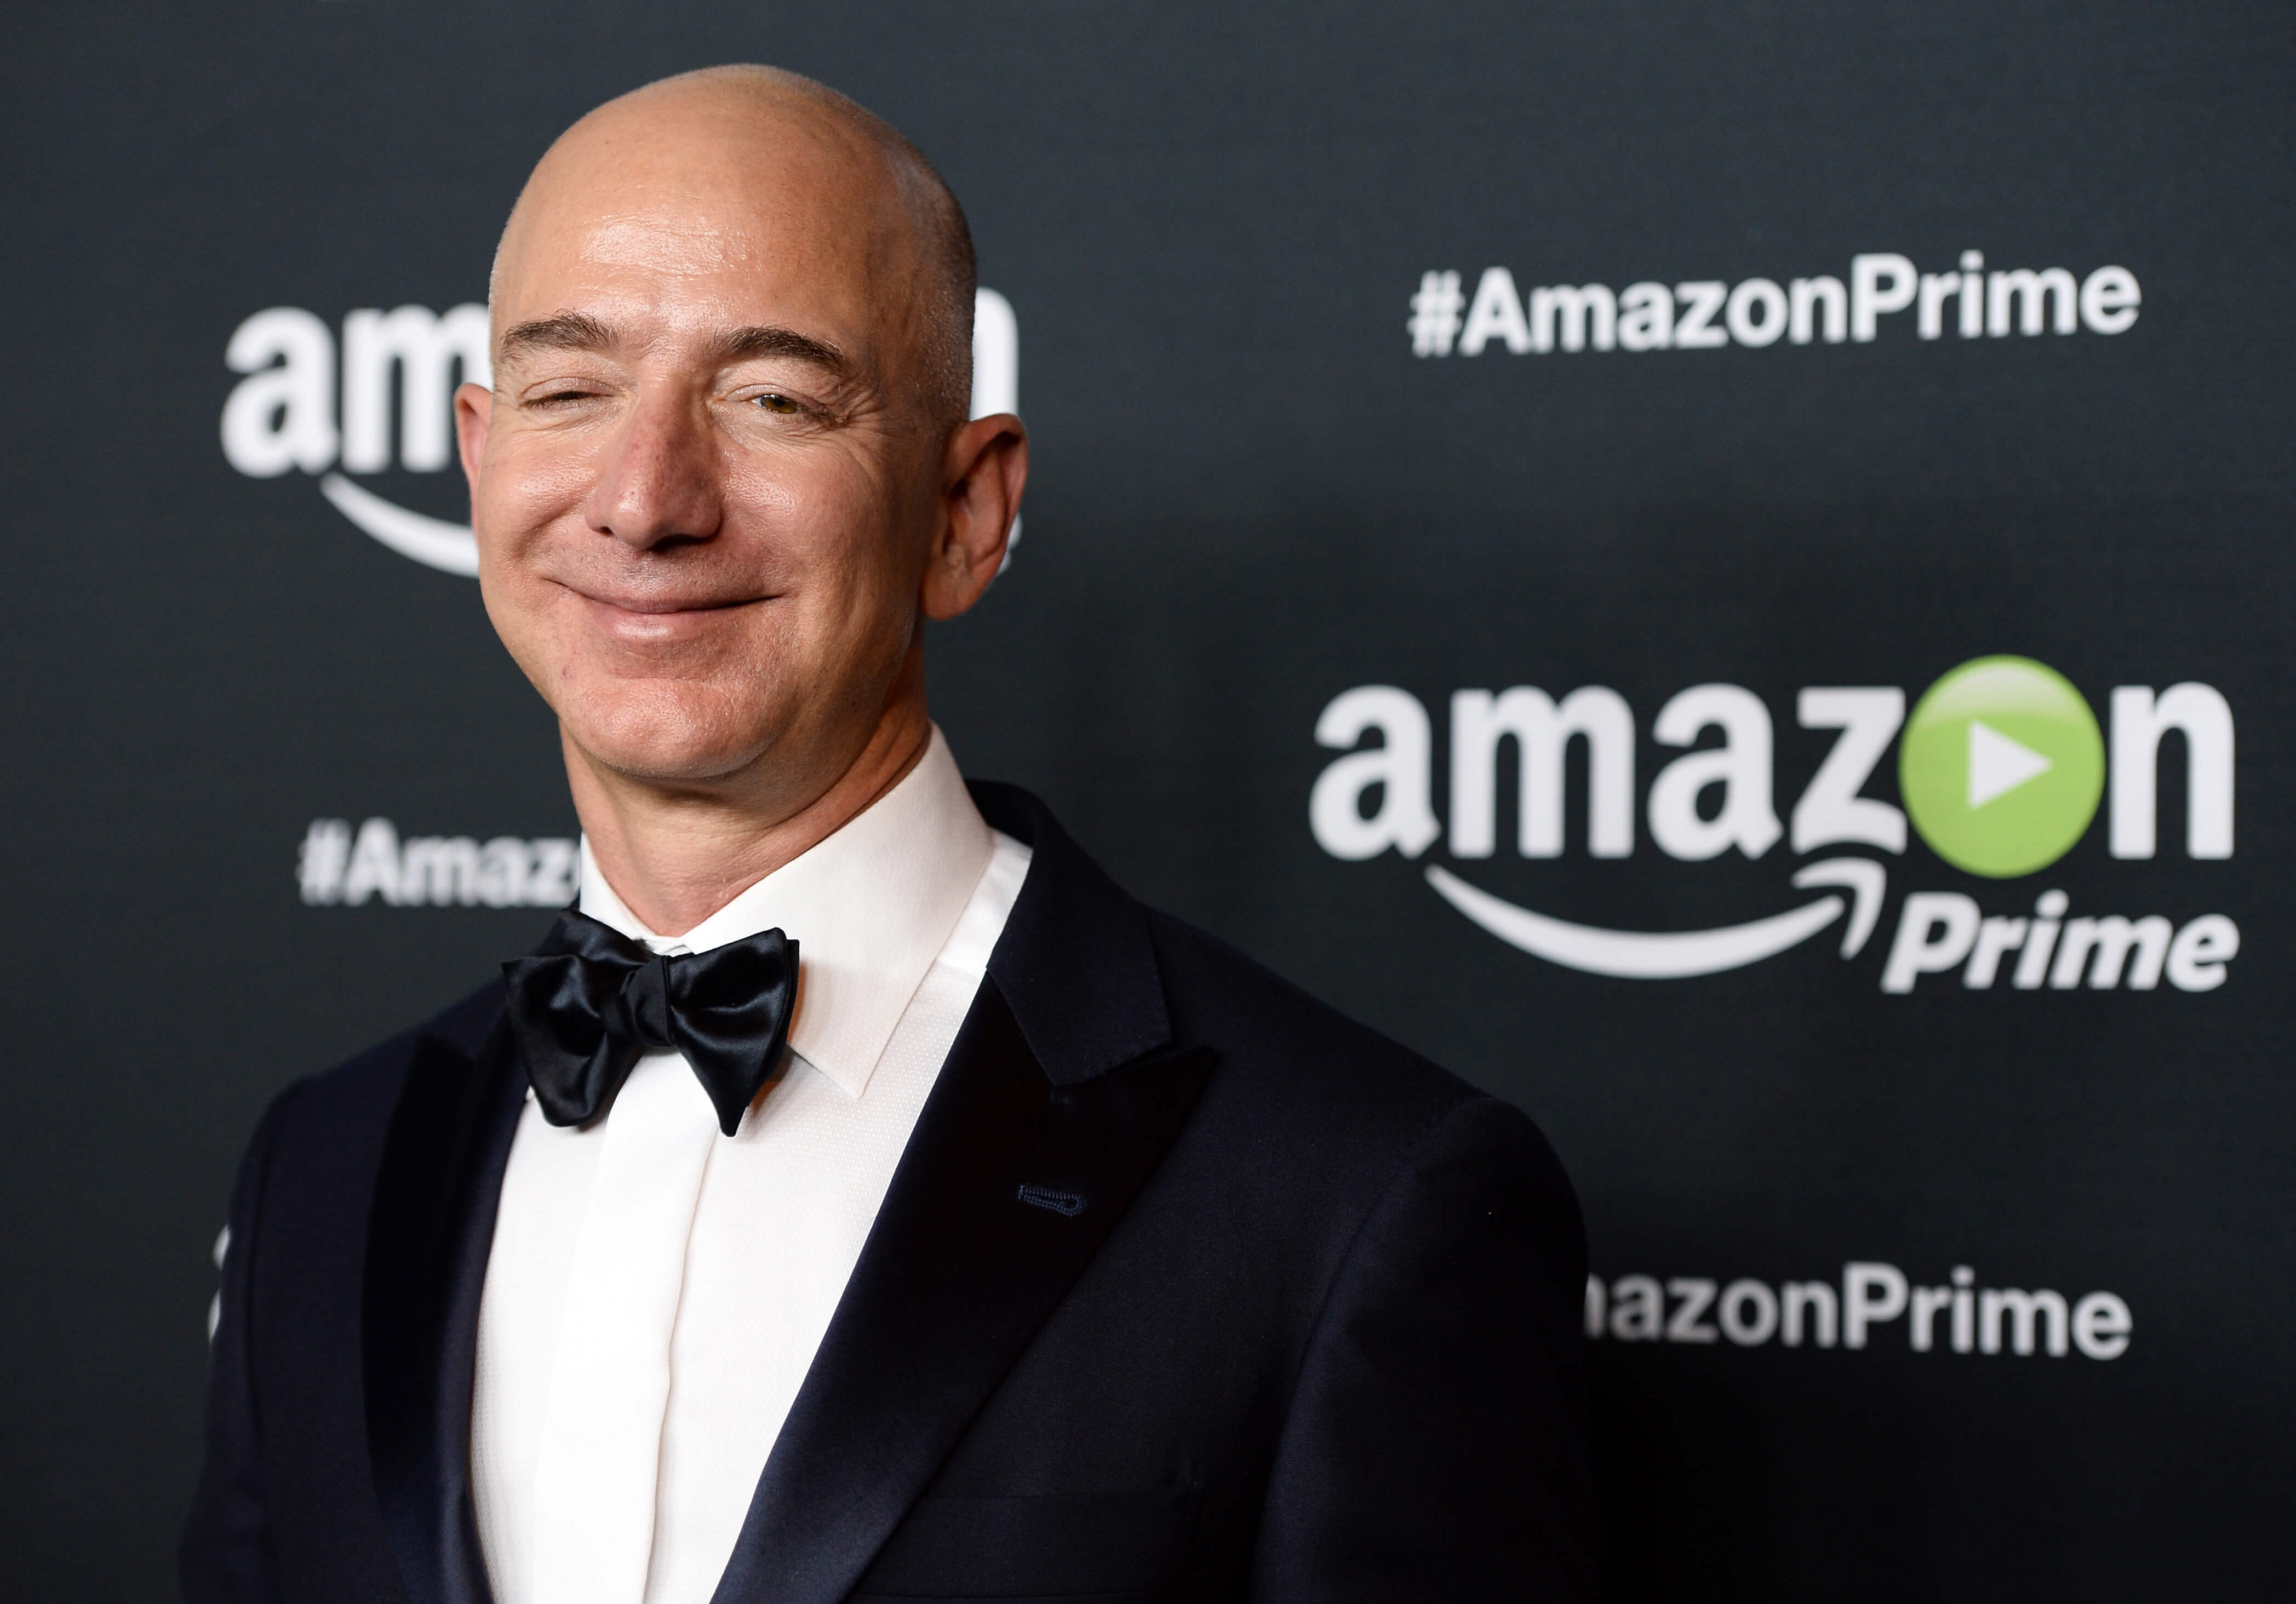 Amazon Prime Video statistics are uncovered for the first time